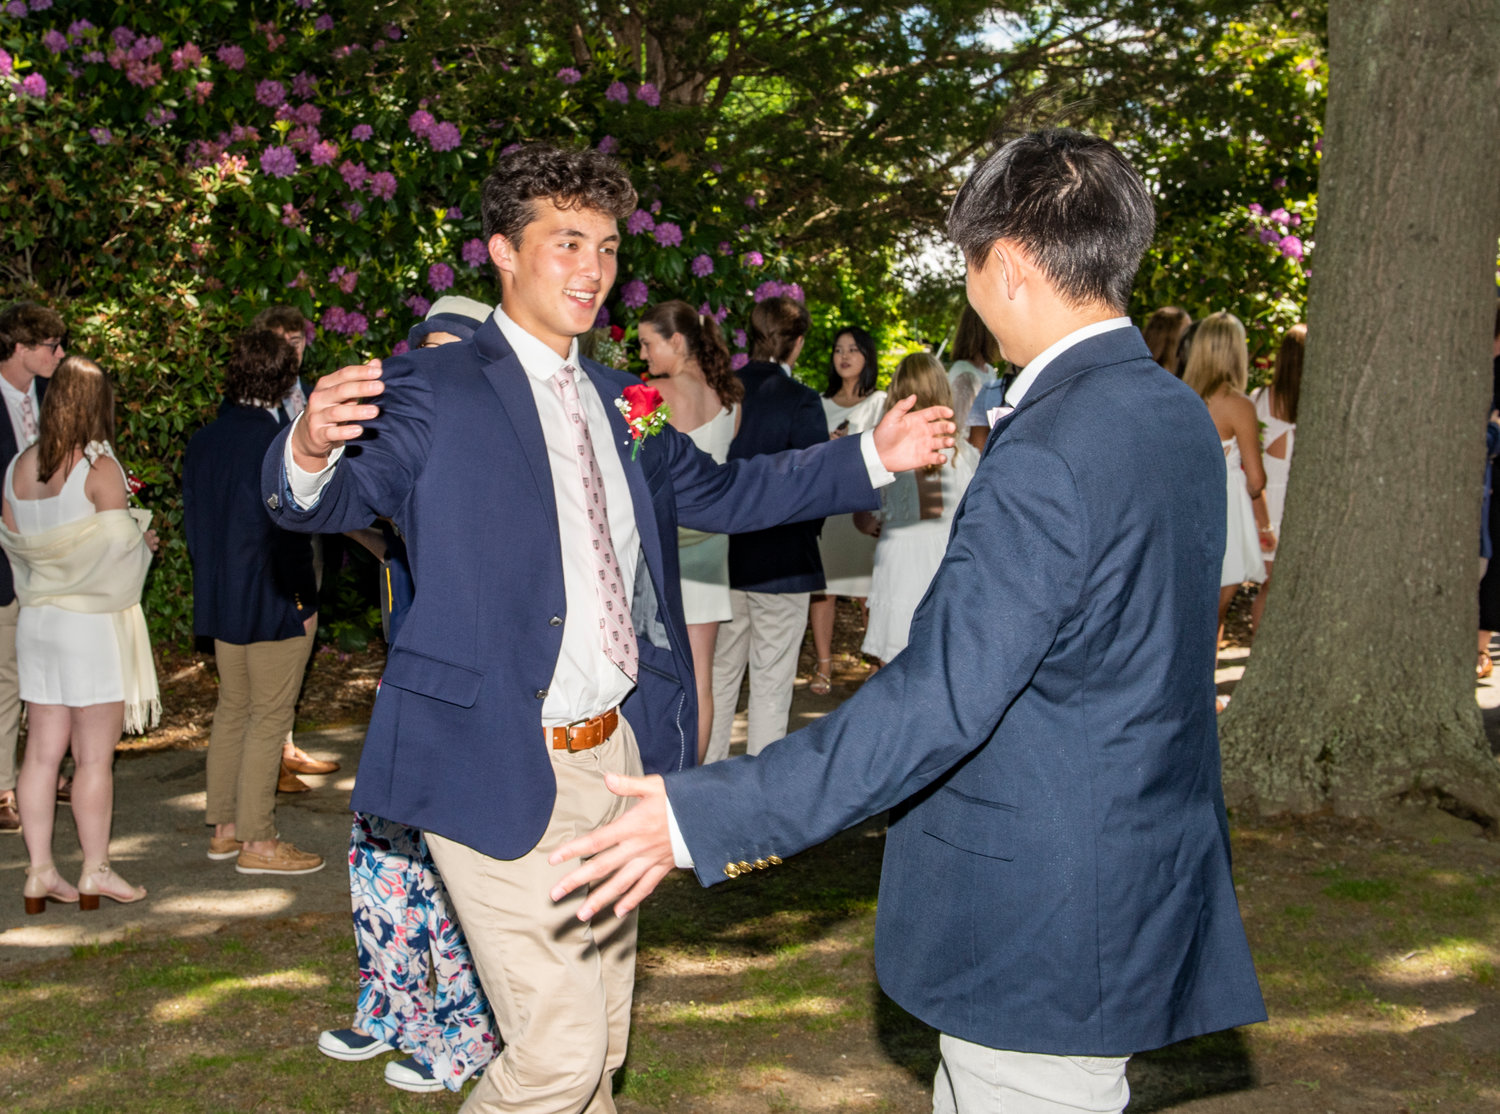 Davis Lee of Portsmouth congratulates a classmate at the conclusion of Portsmouth Abbey’s commencement exercises on Sunday, May 28.